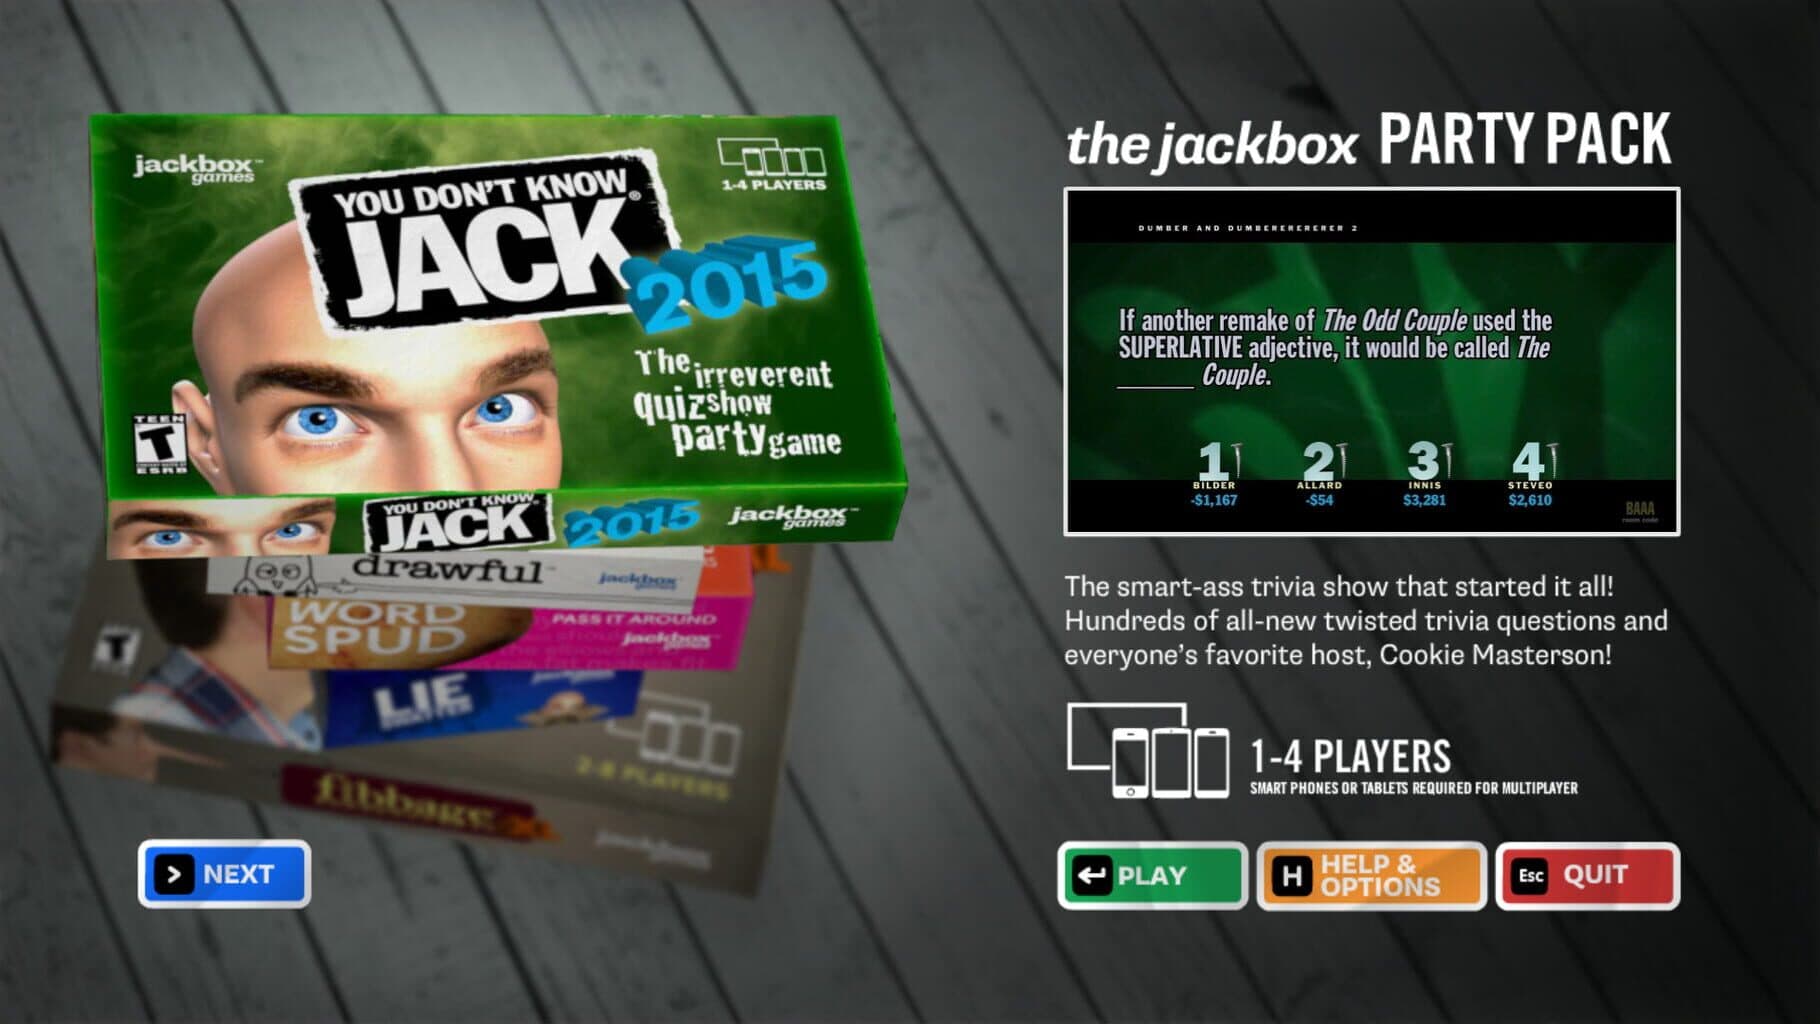 The Jackbox Party Pack Image